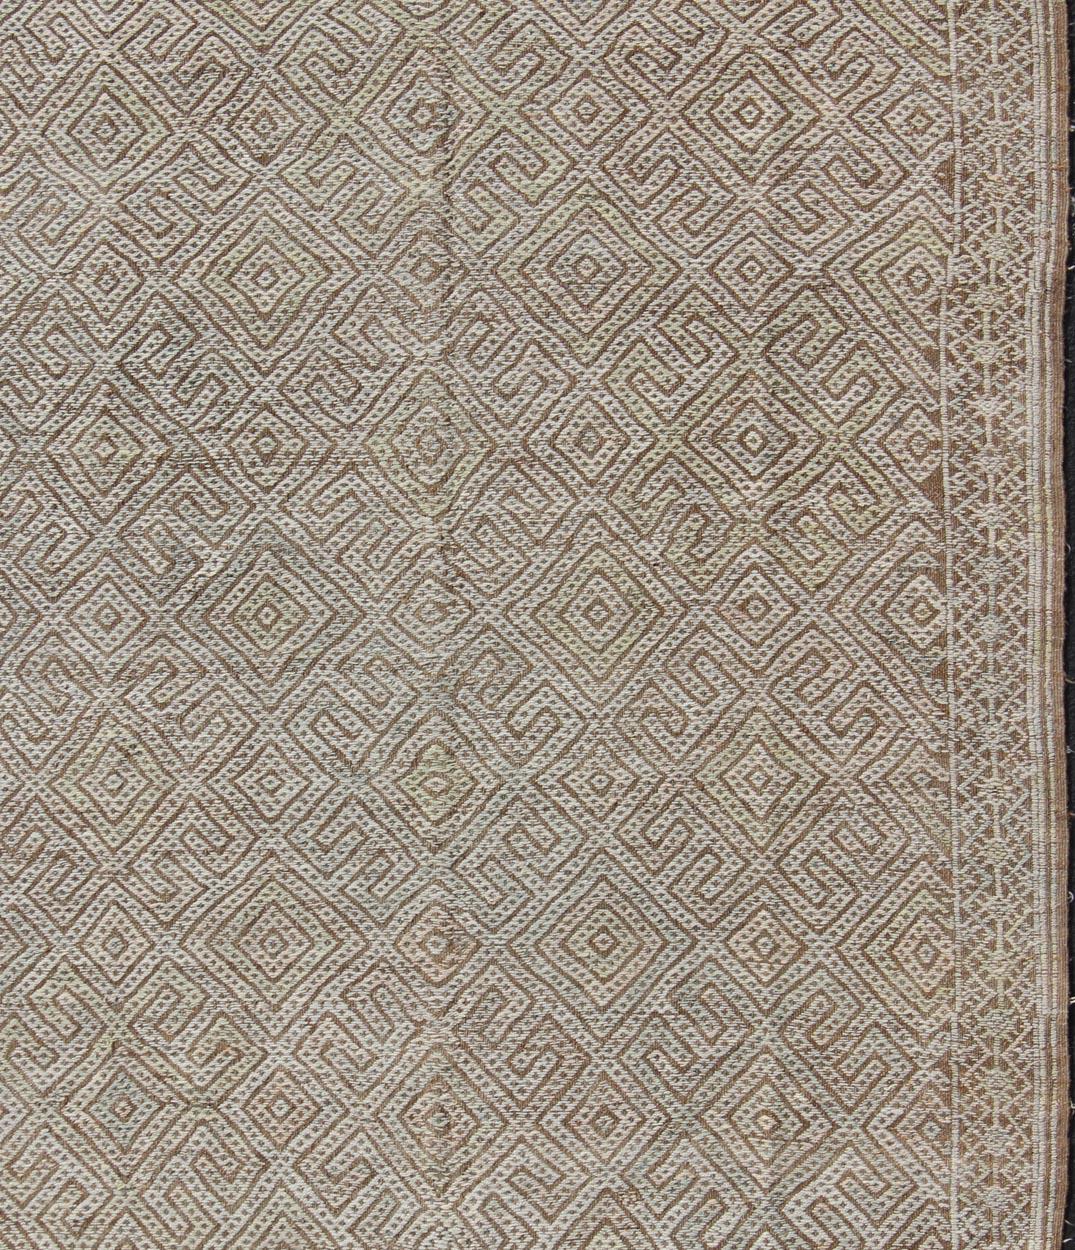 Turkish Large Vintage Embroidered Flat-Weave in Ivory and Brown with Geometric Design For Sale